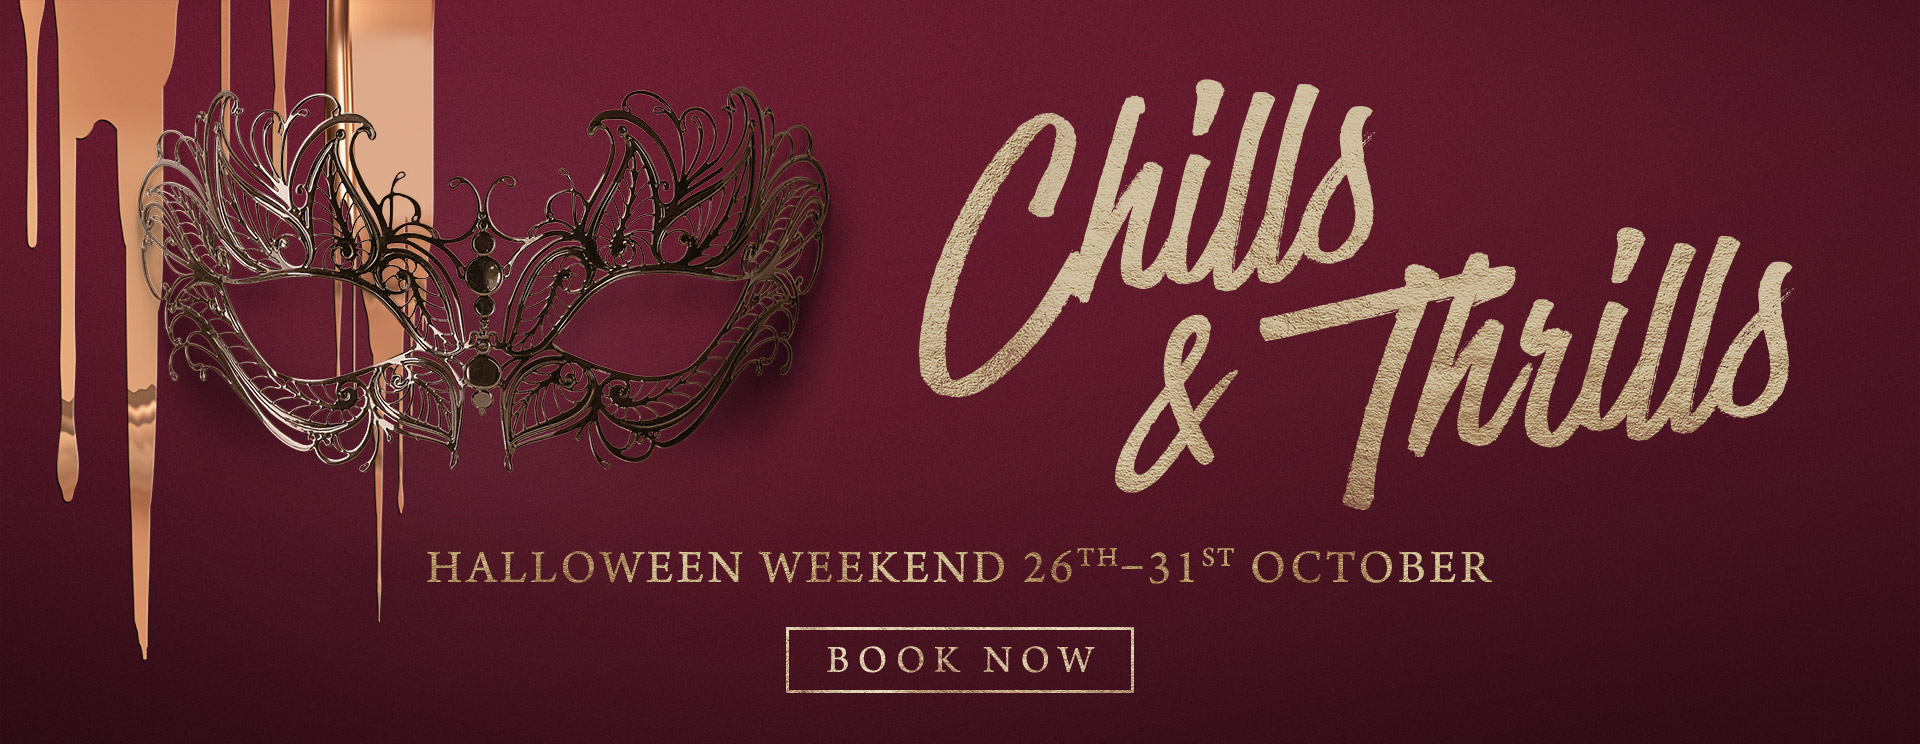 Chills & Thrills this Halloween at The Old Bulls Head